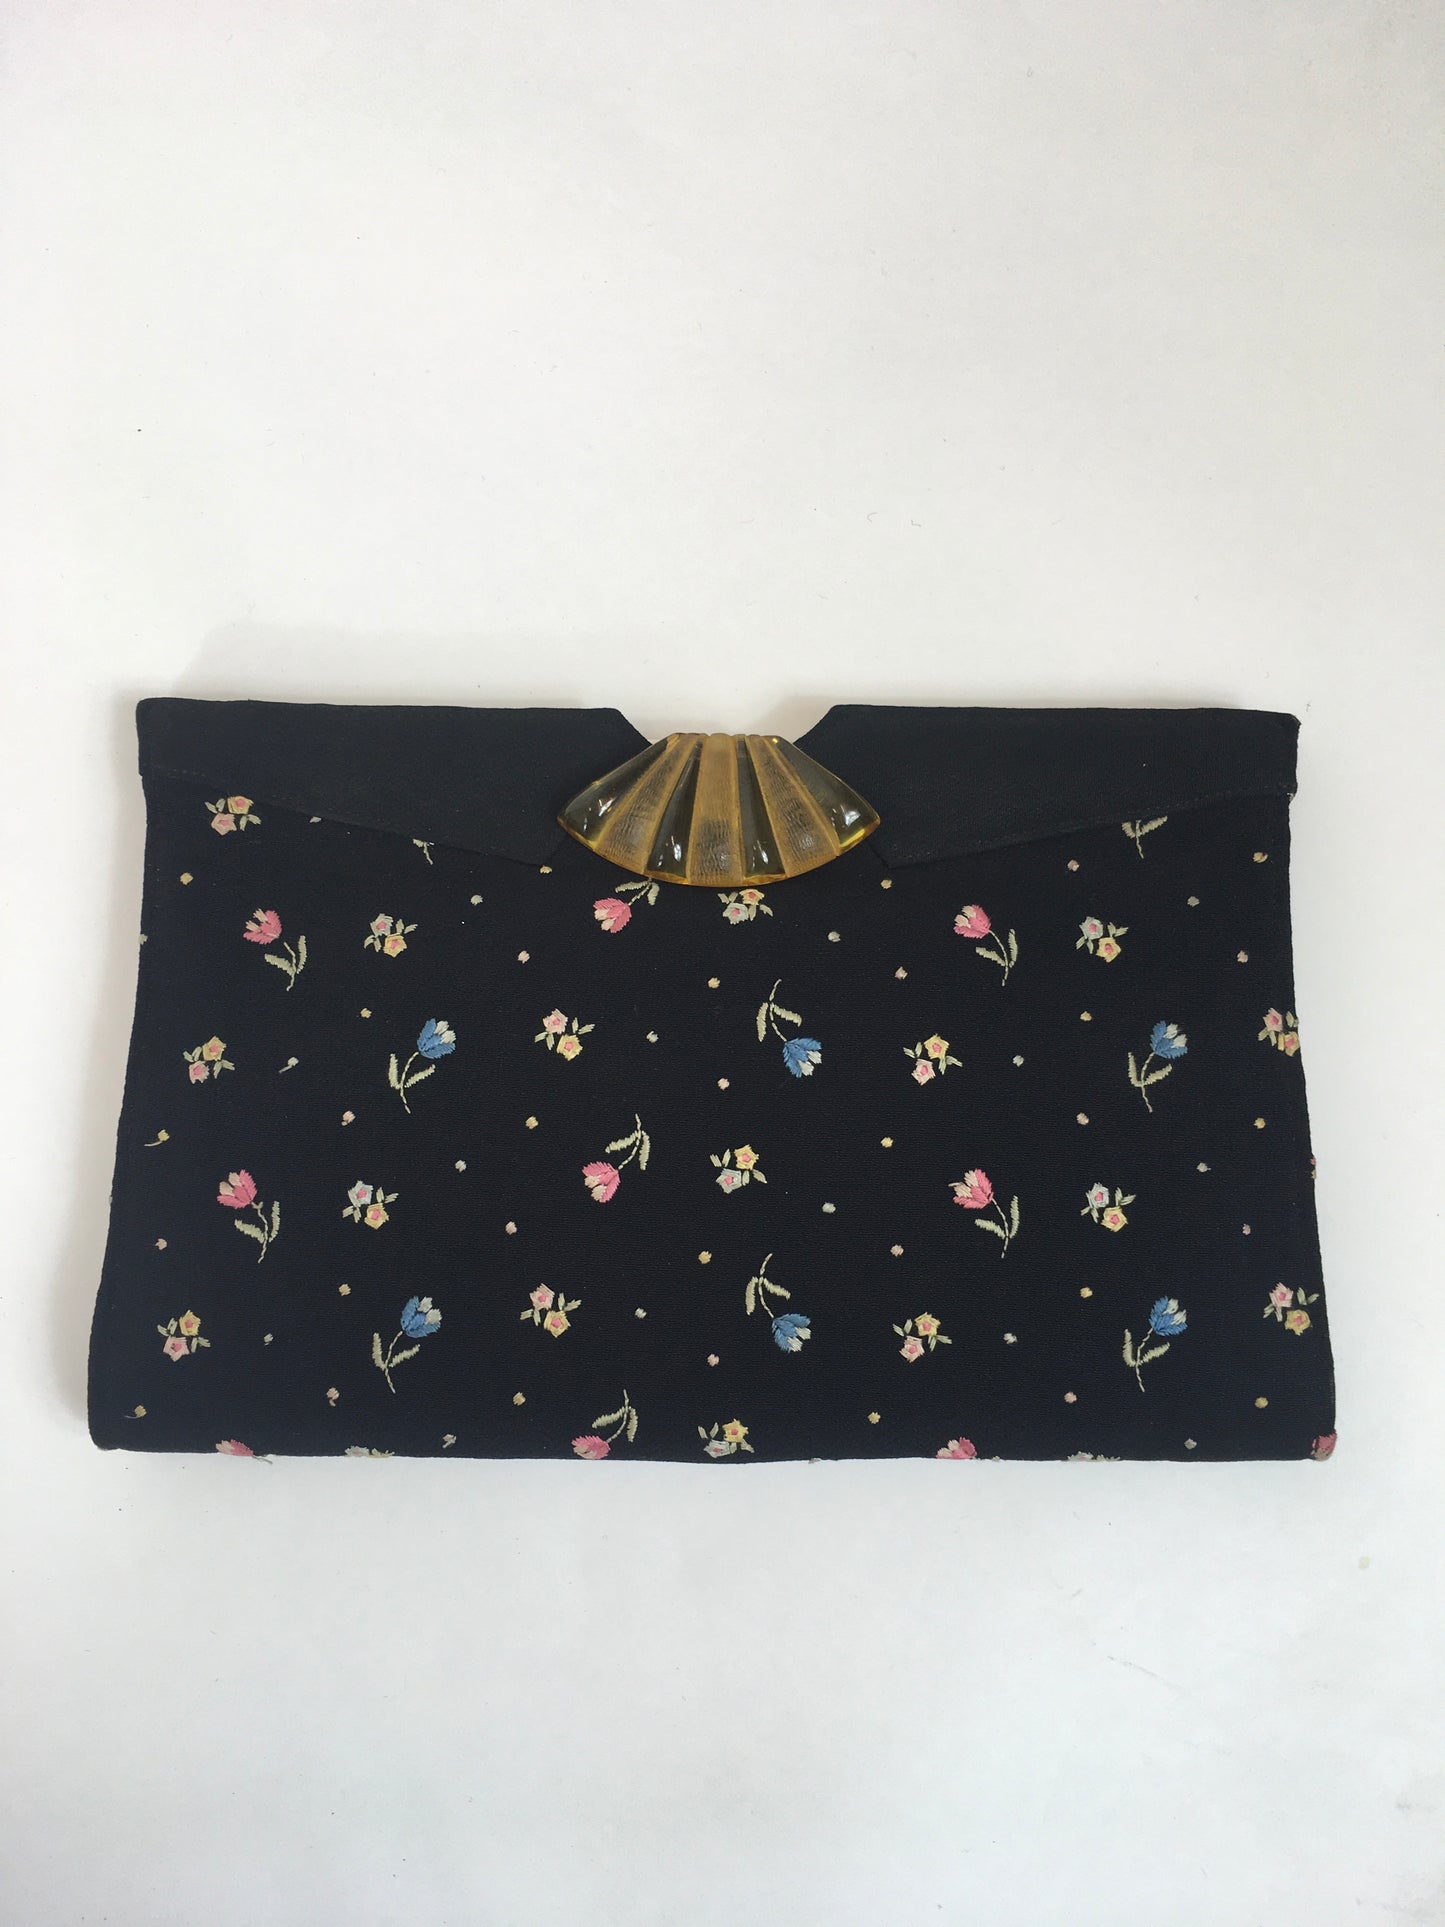 Original 1930's Stunning Embroidered Clutch Handbag - With Fan Shaped Lucite Clasp